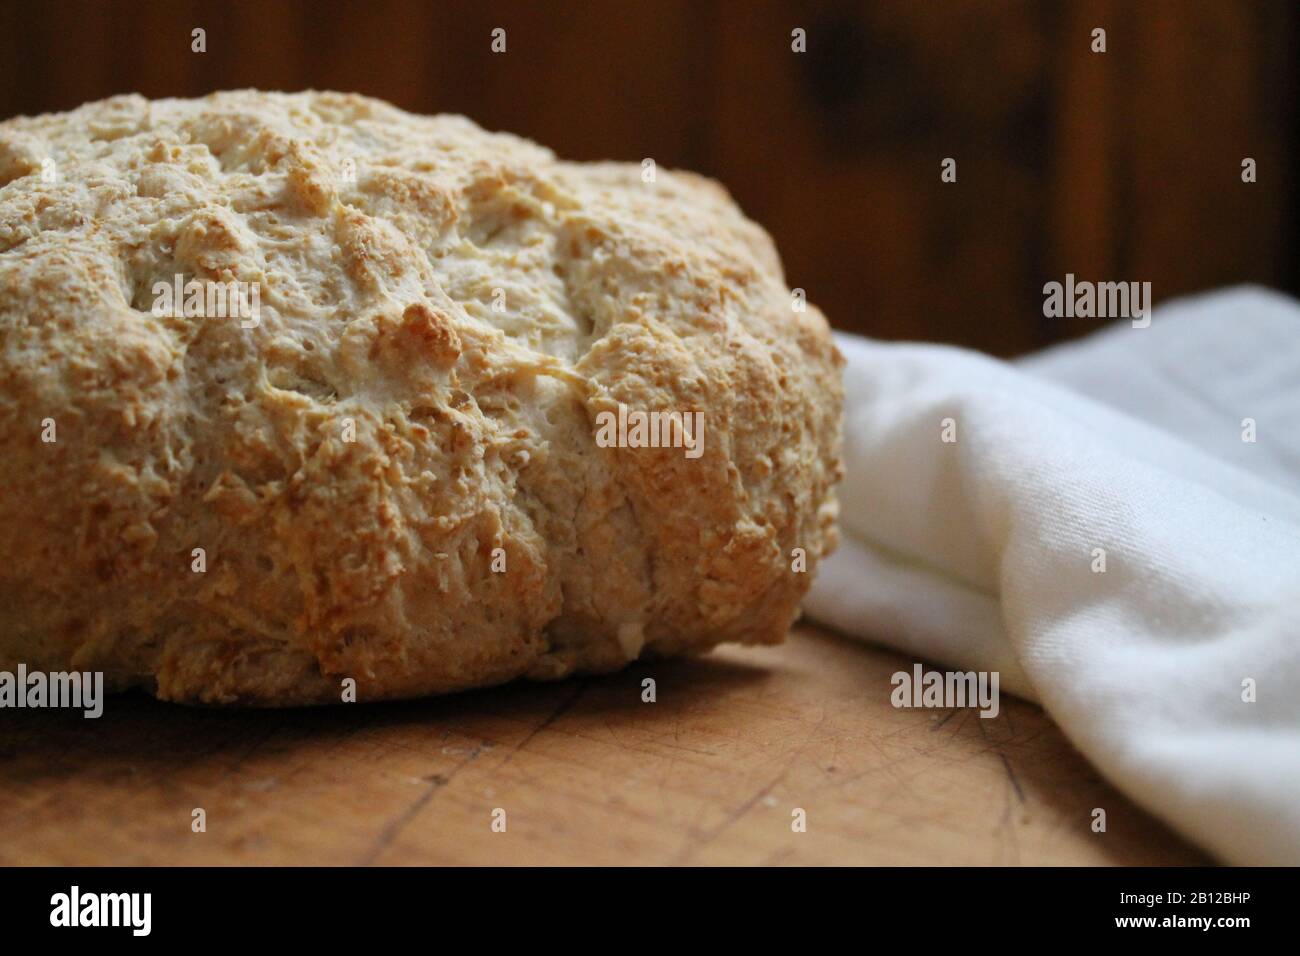 Fresh baked bread on wooden countertop Stock Photo